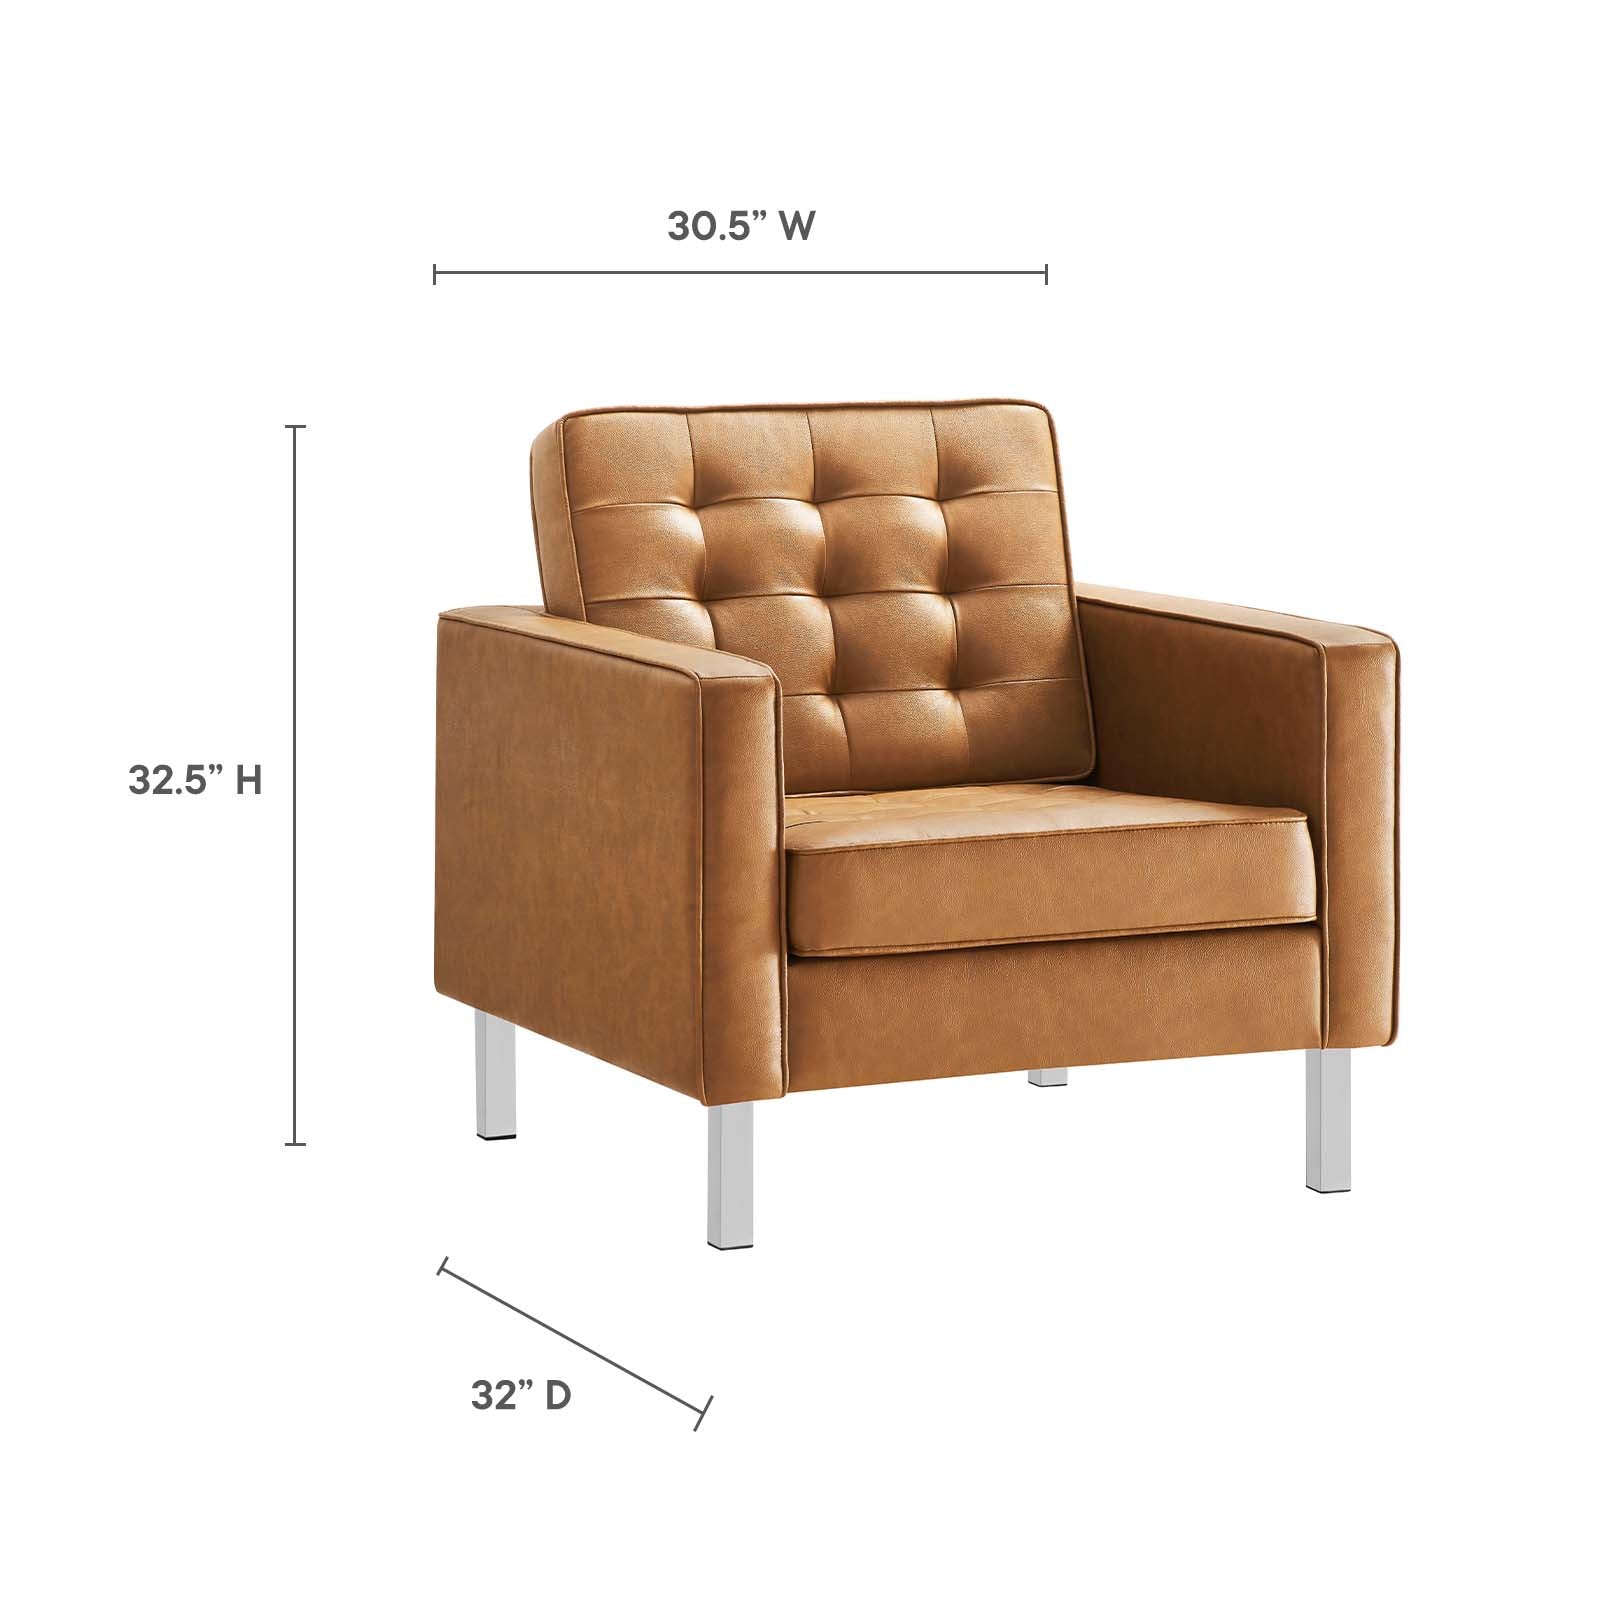 Modway Accent Chairs - Loft Tufted Upholstered Faux Leather Armchair Silver Tan